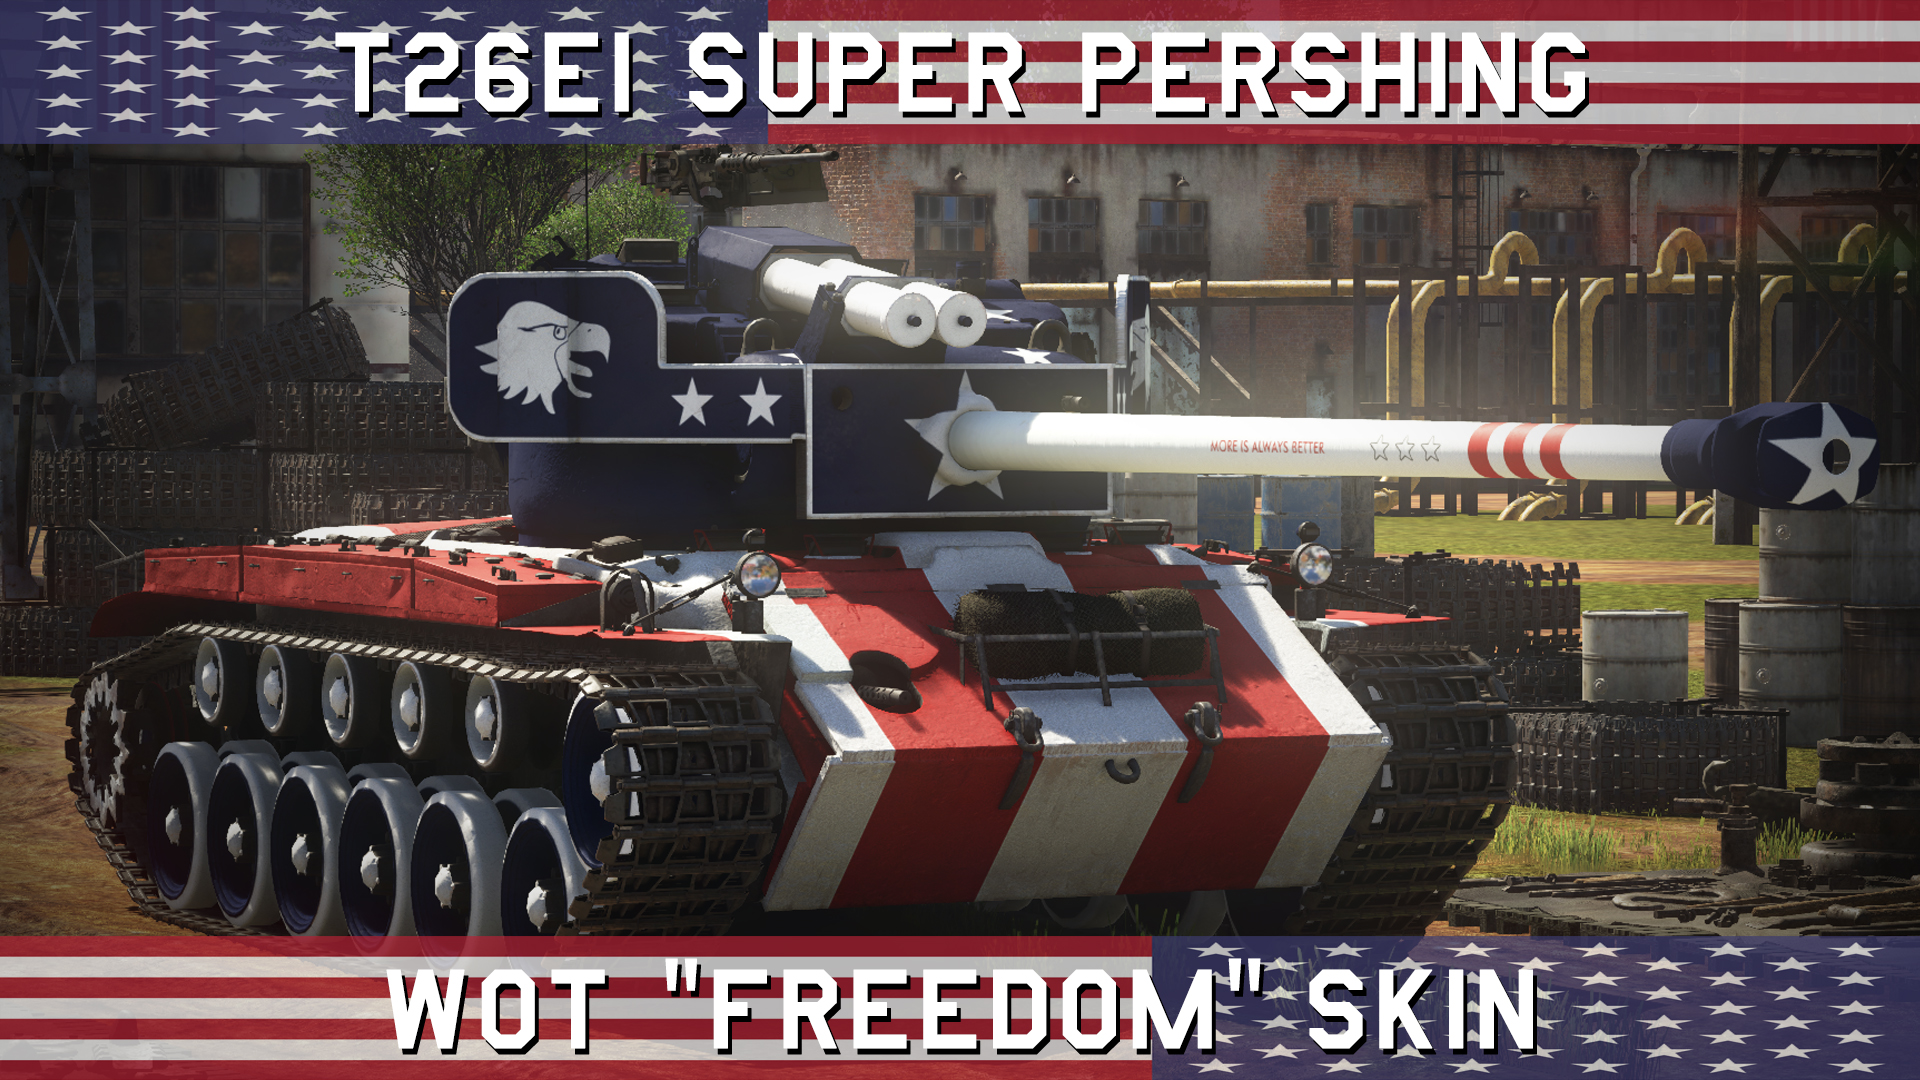 Super pershing wot How the